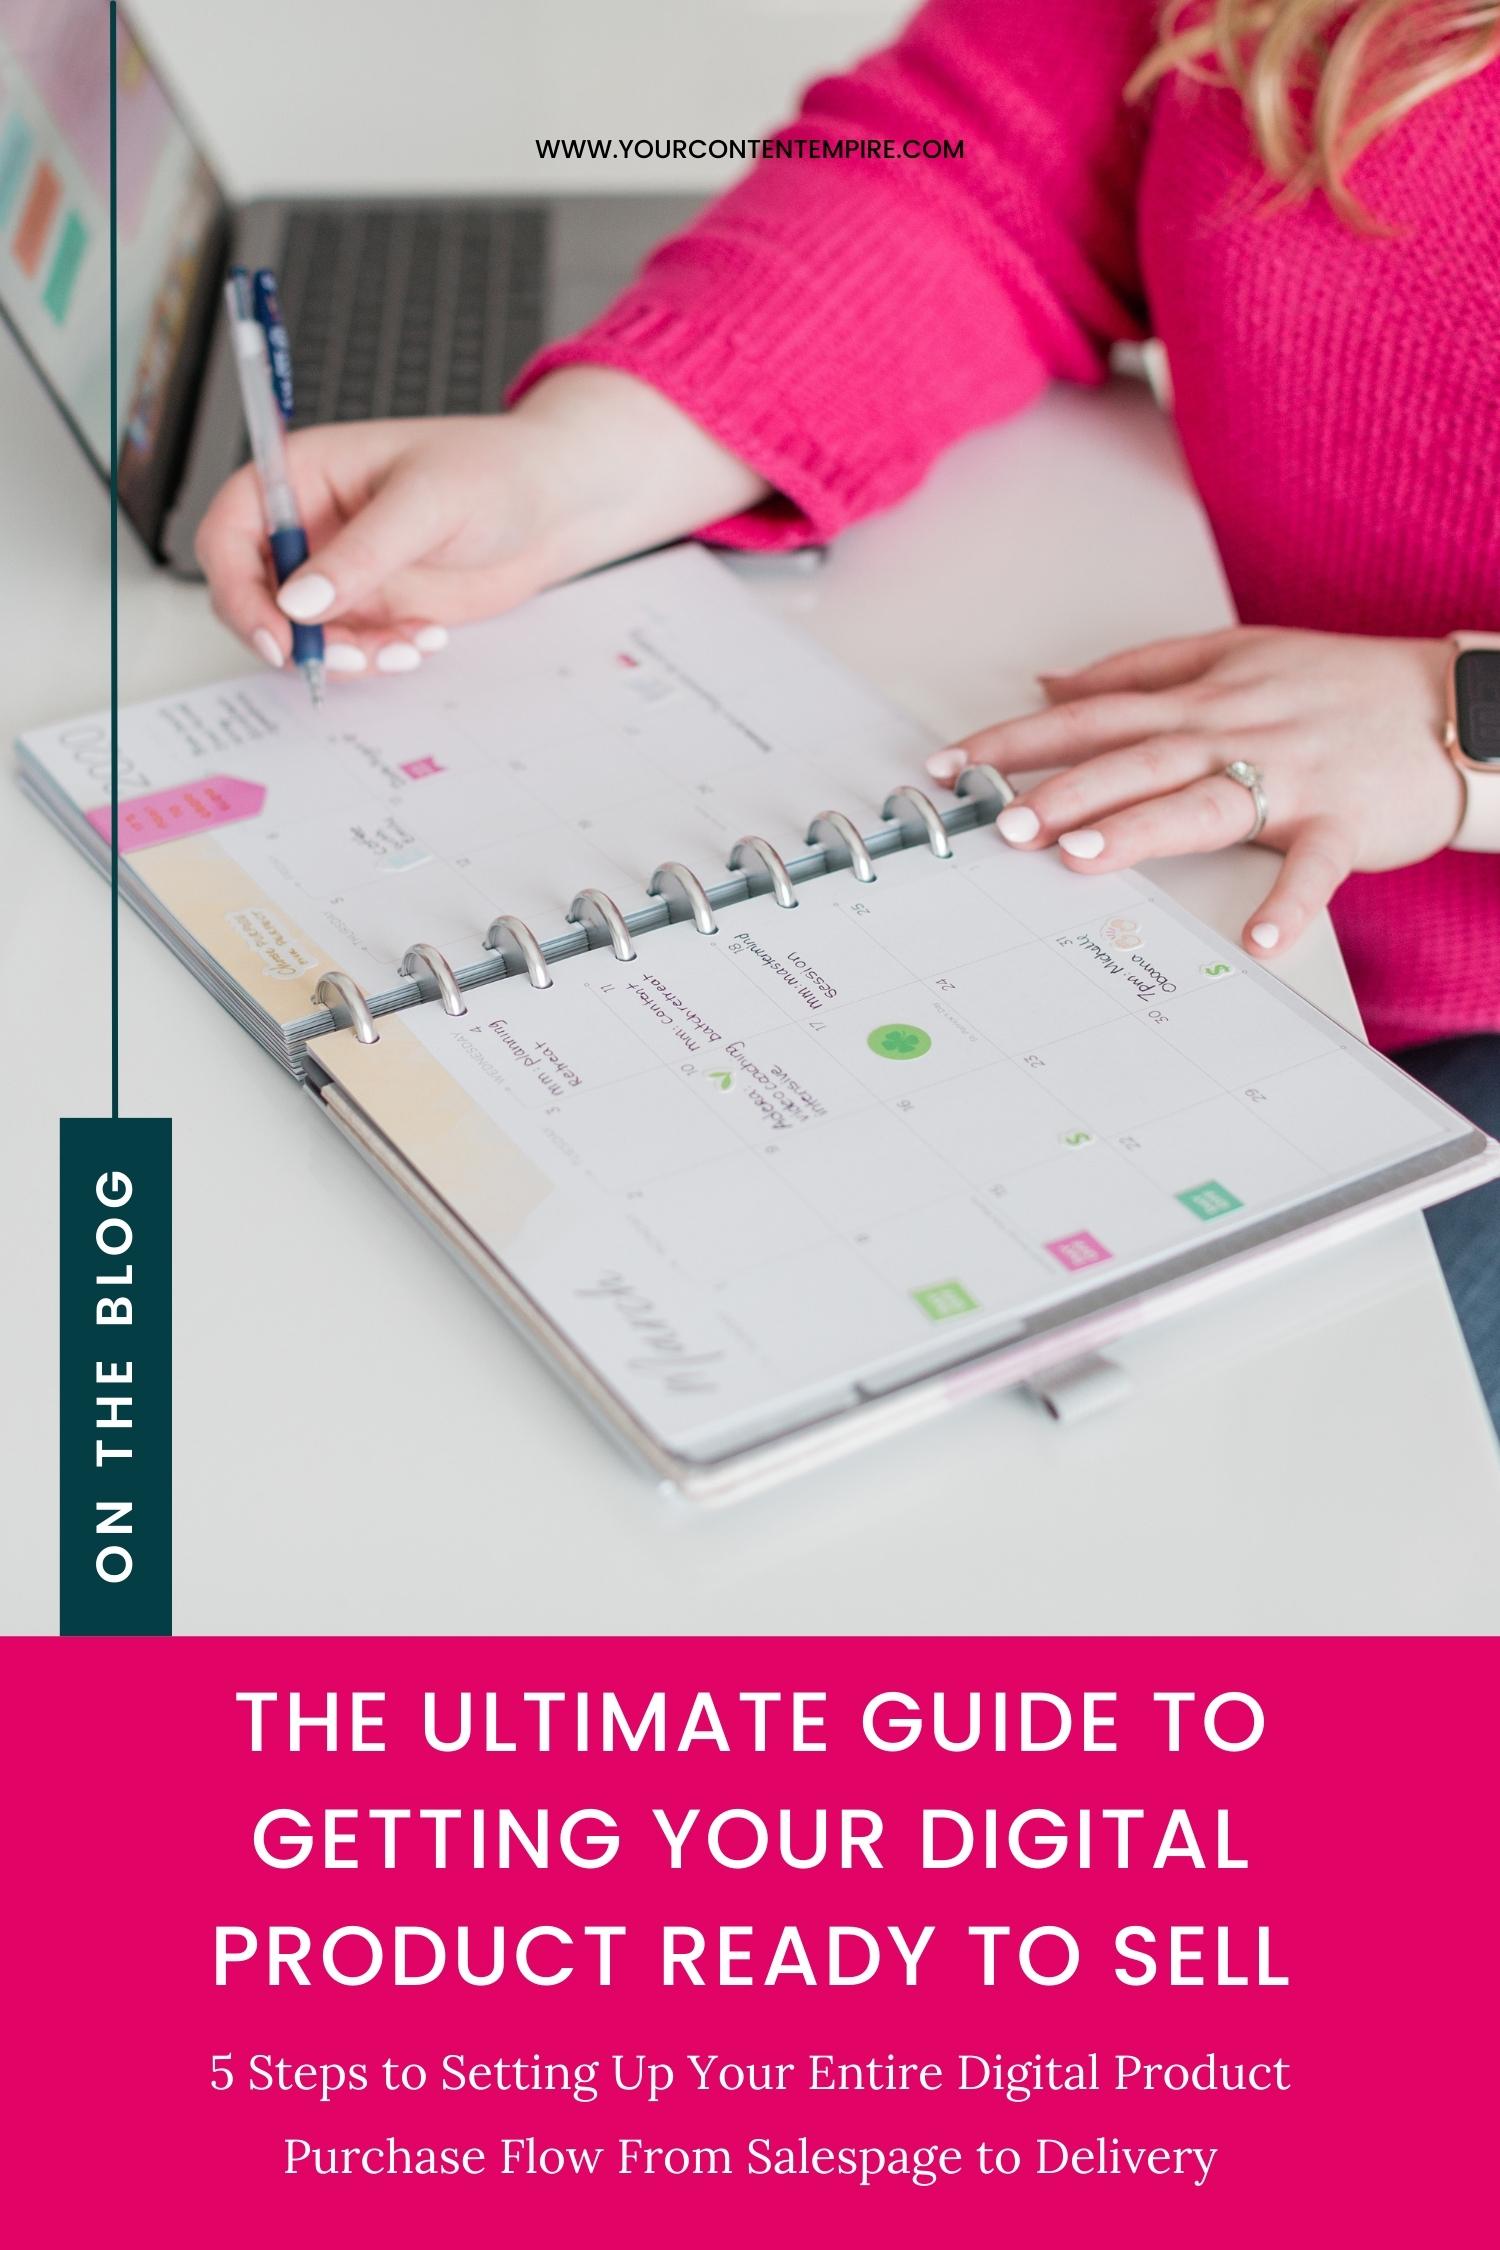 The Ultimate Checklist for Getting Your Digital Product Ready to Sell by Your Content Empire